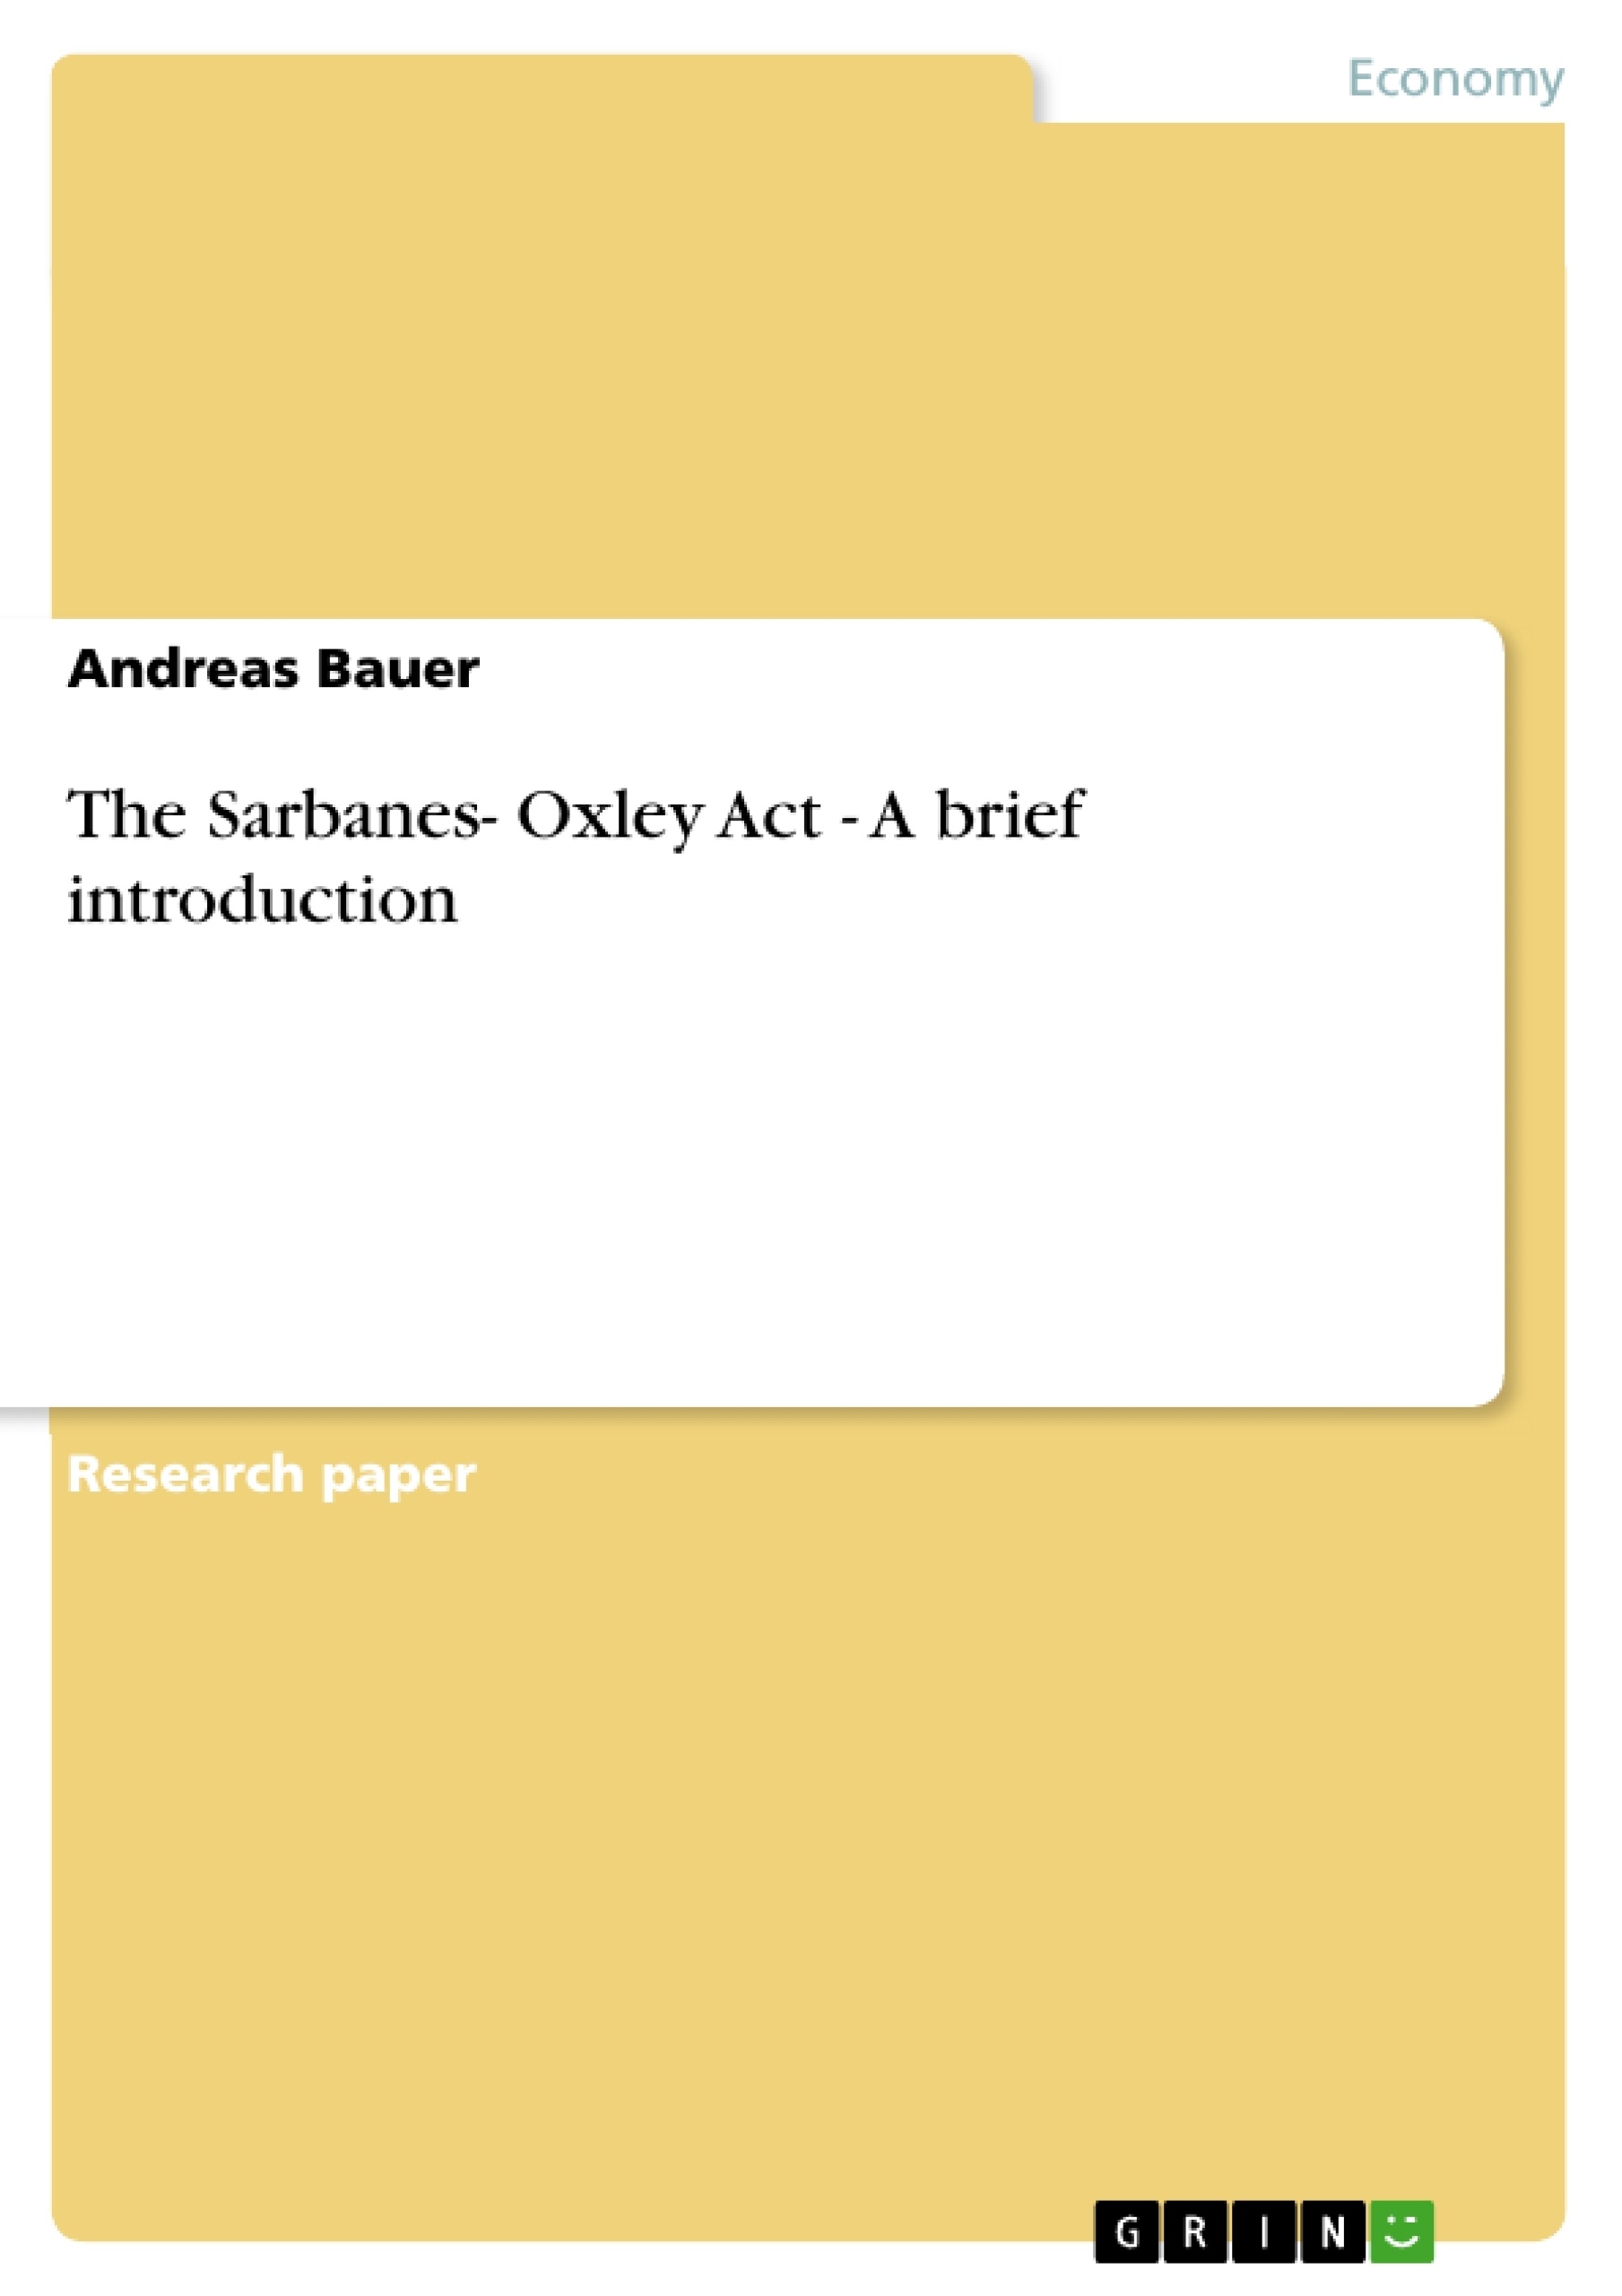 Title: The Sarbanes- Oxley Act - A brief introduction 